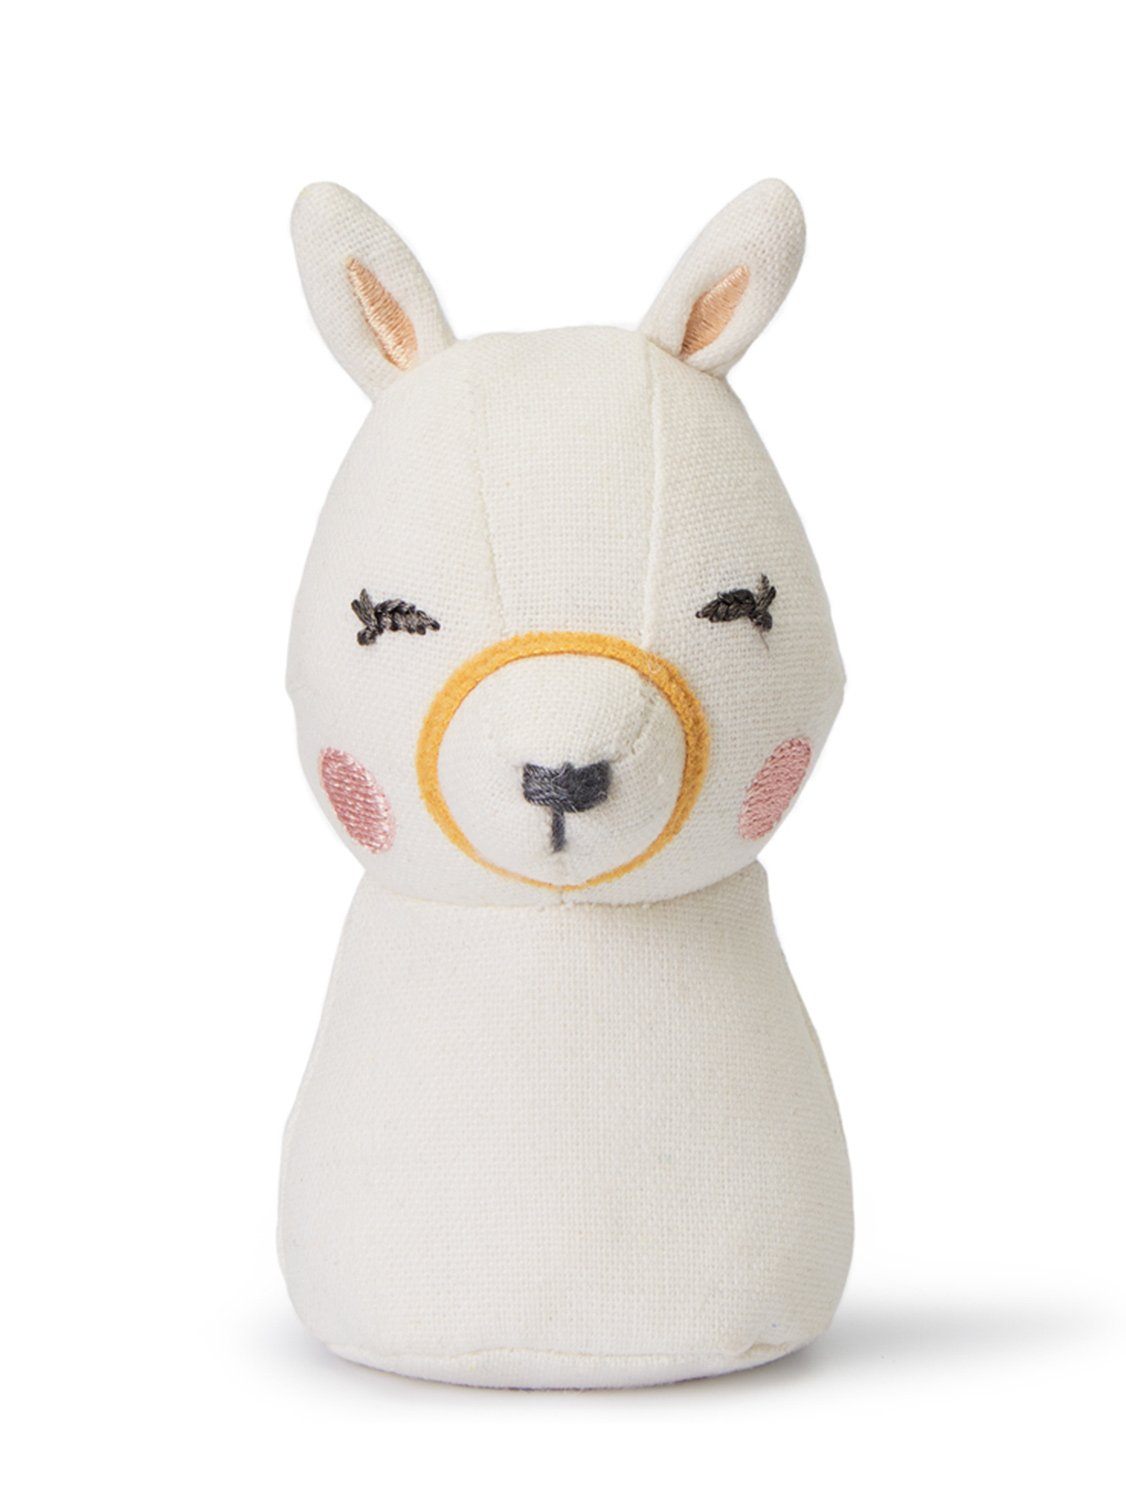 White Llama Rattle by Picca Loulou - Rattle - Picca Loulou